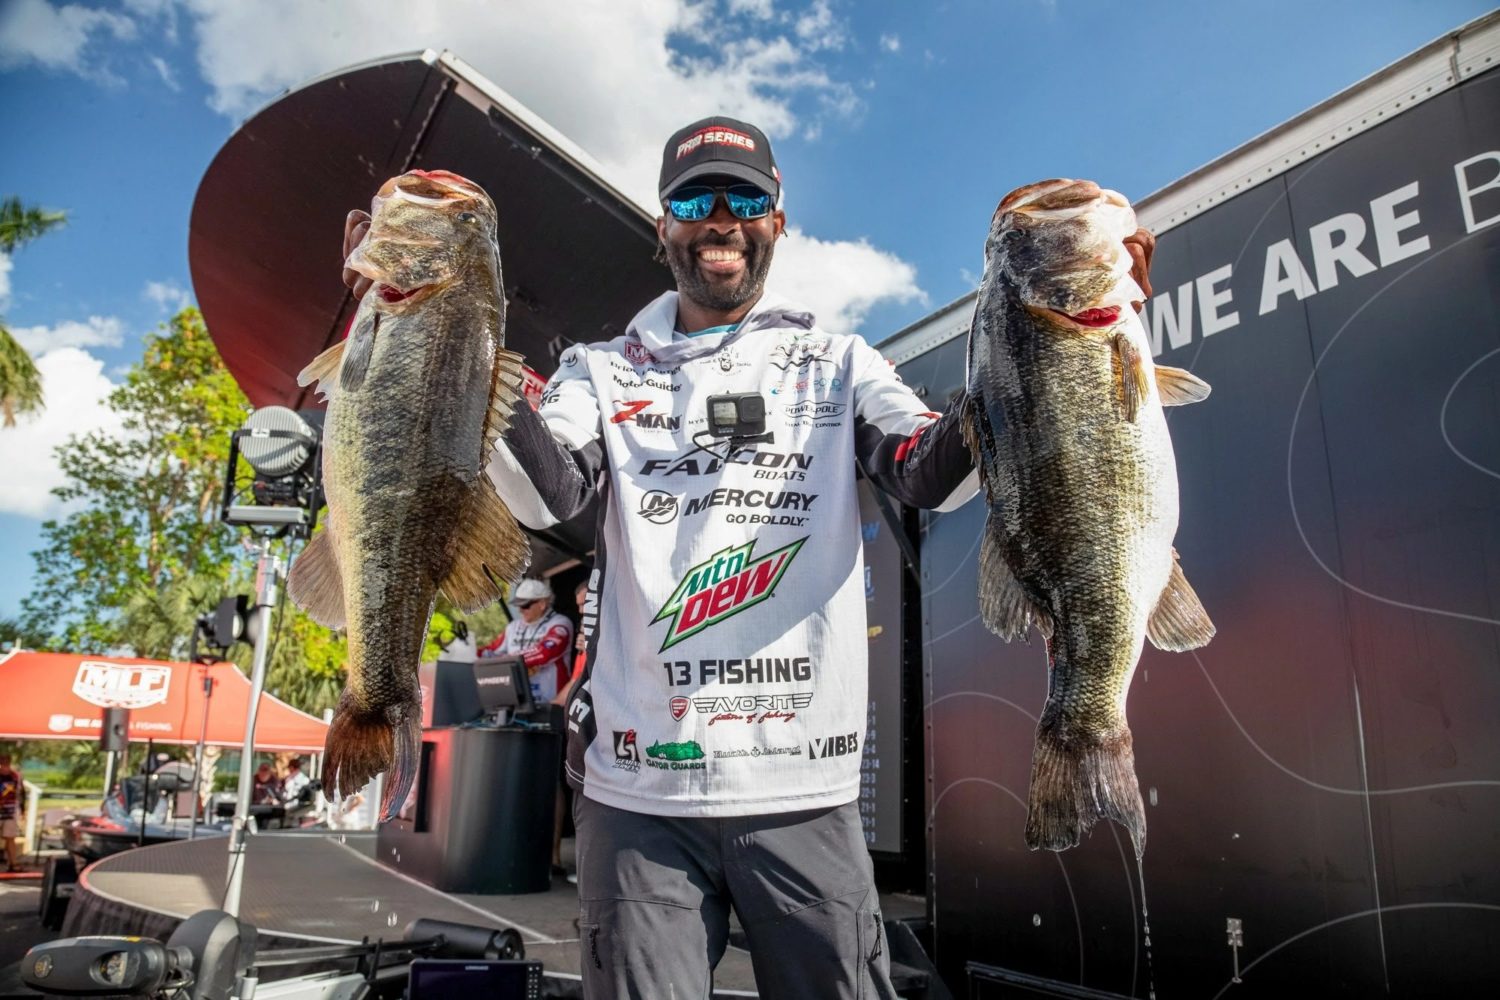 Clarks Hill Lake Set to Host MLF Tackle Warehouse Invitational Stop 2